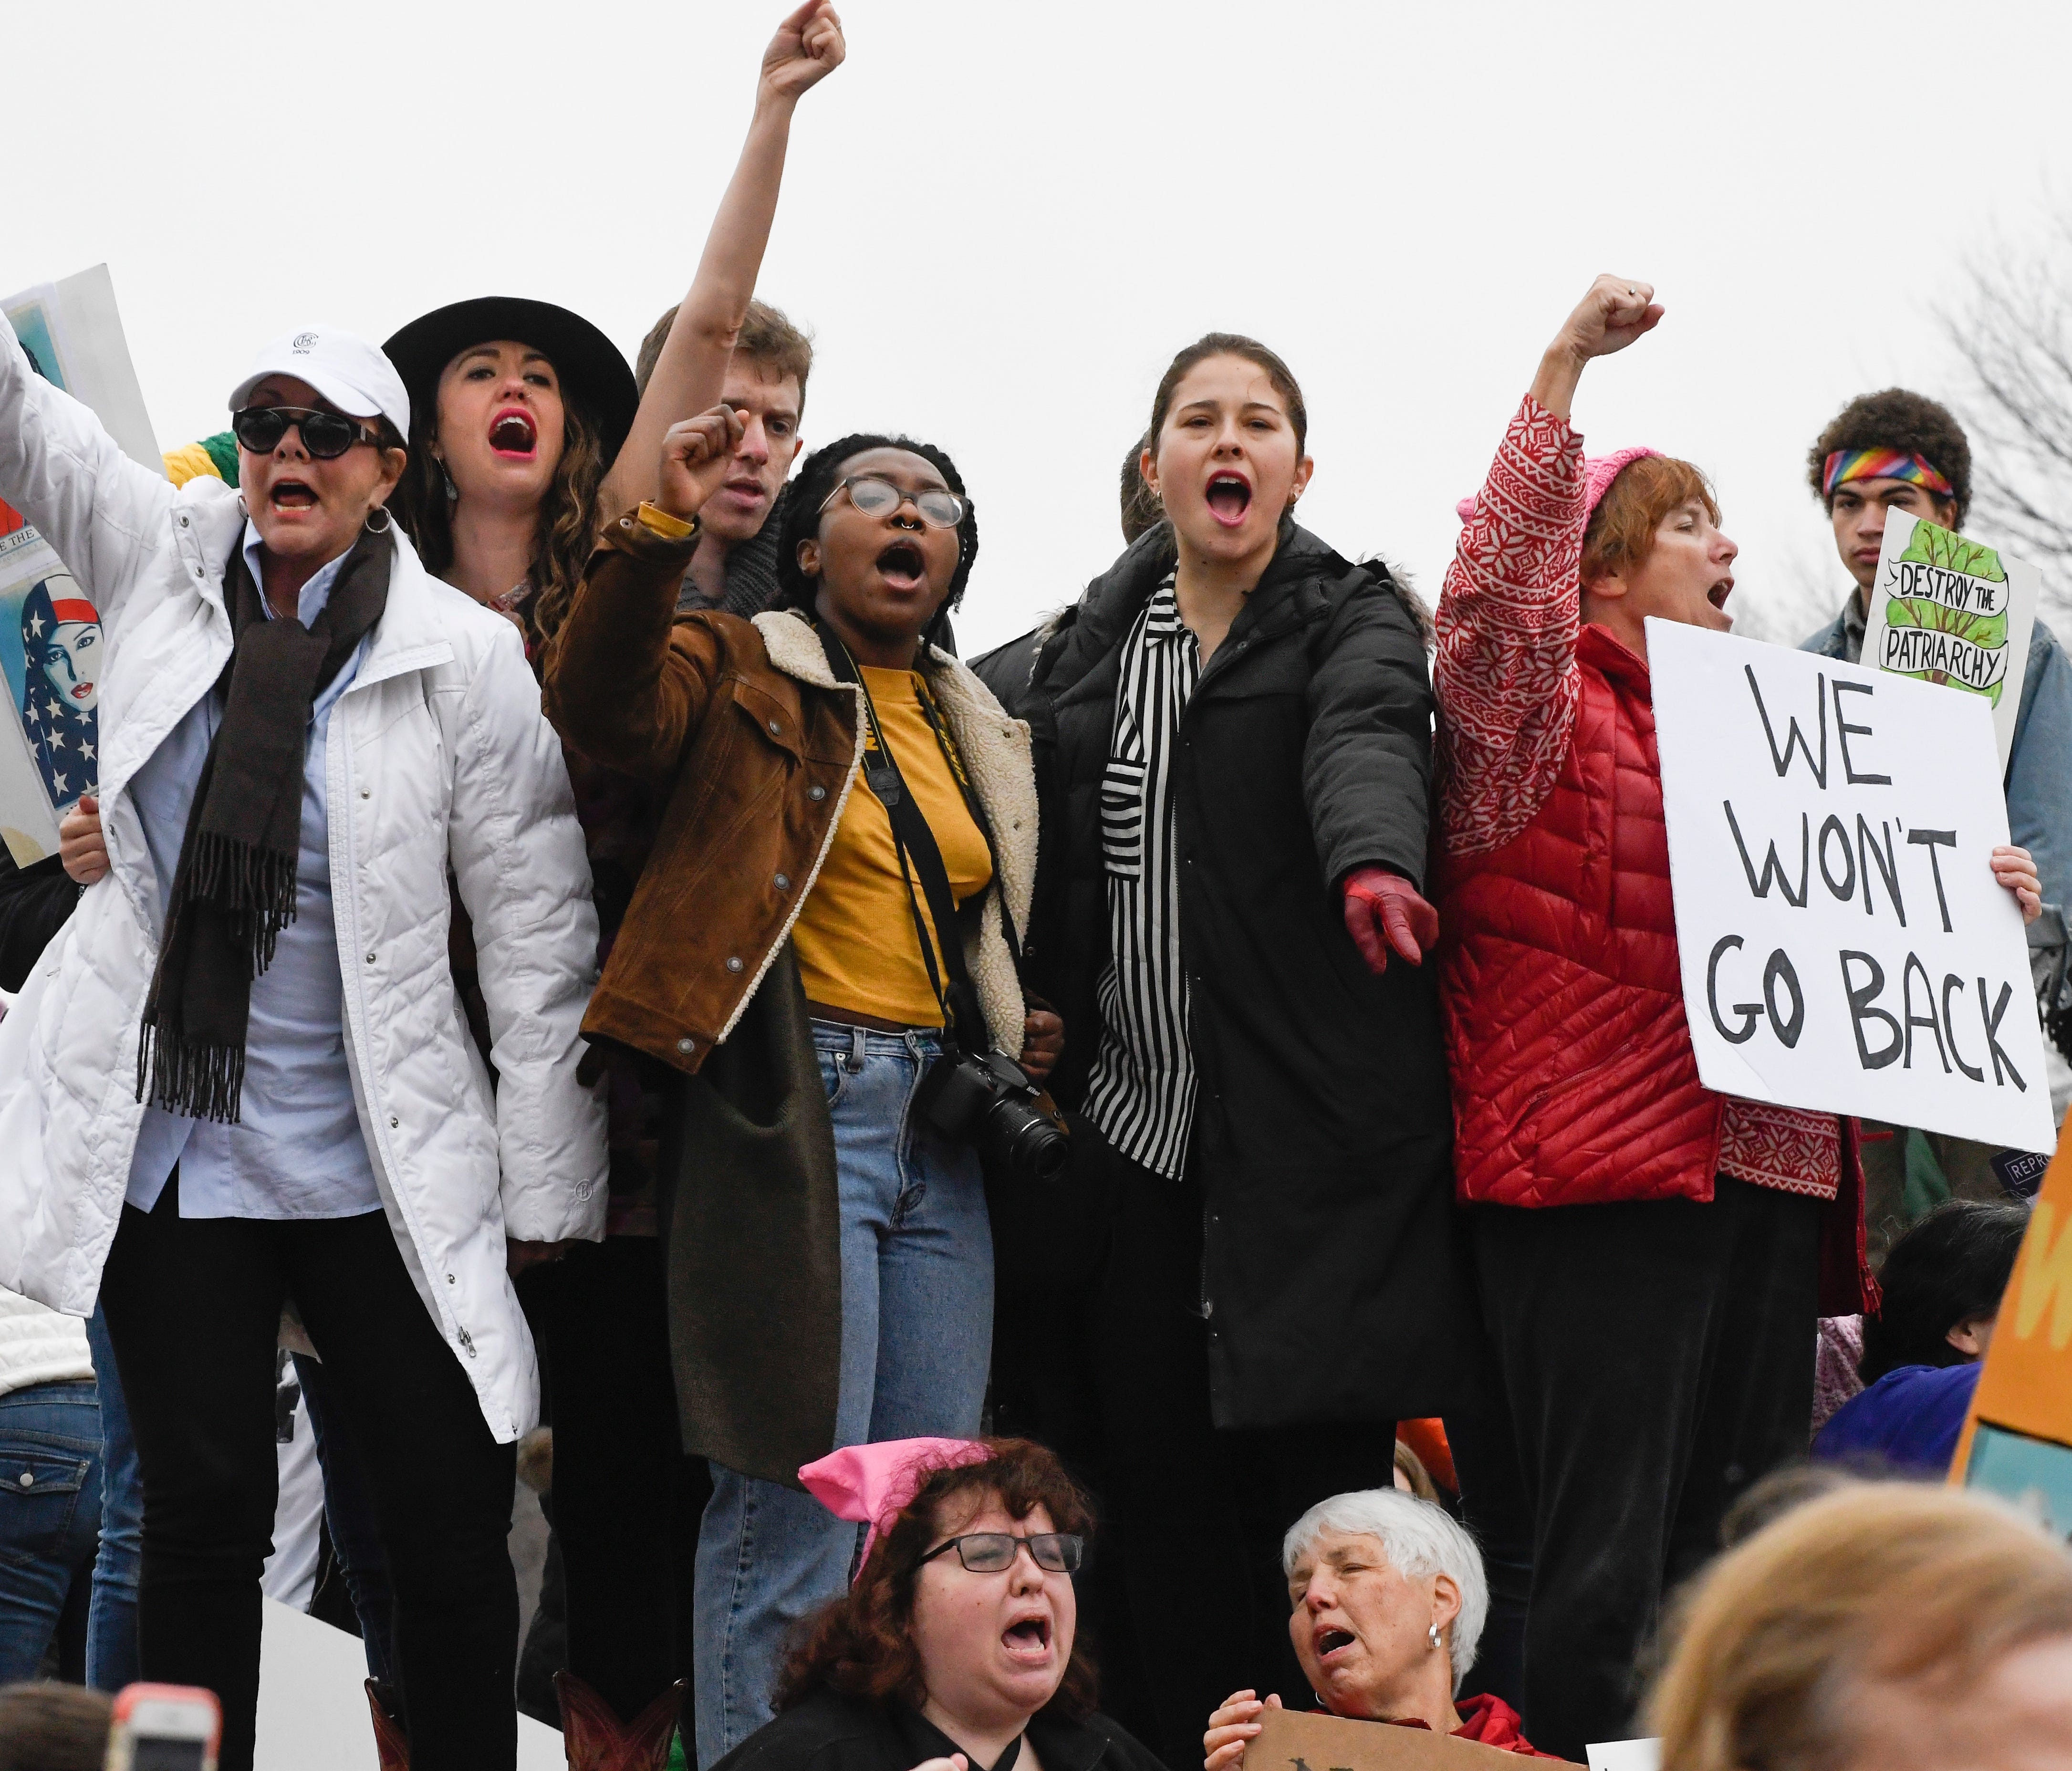 Protestors chat anti-Trump slogans during the Women's March on Washington in Washington, DC on Jan. 21, 2017, one day after the inauguration of President-elect Donald J. Trump.